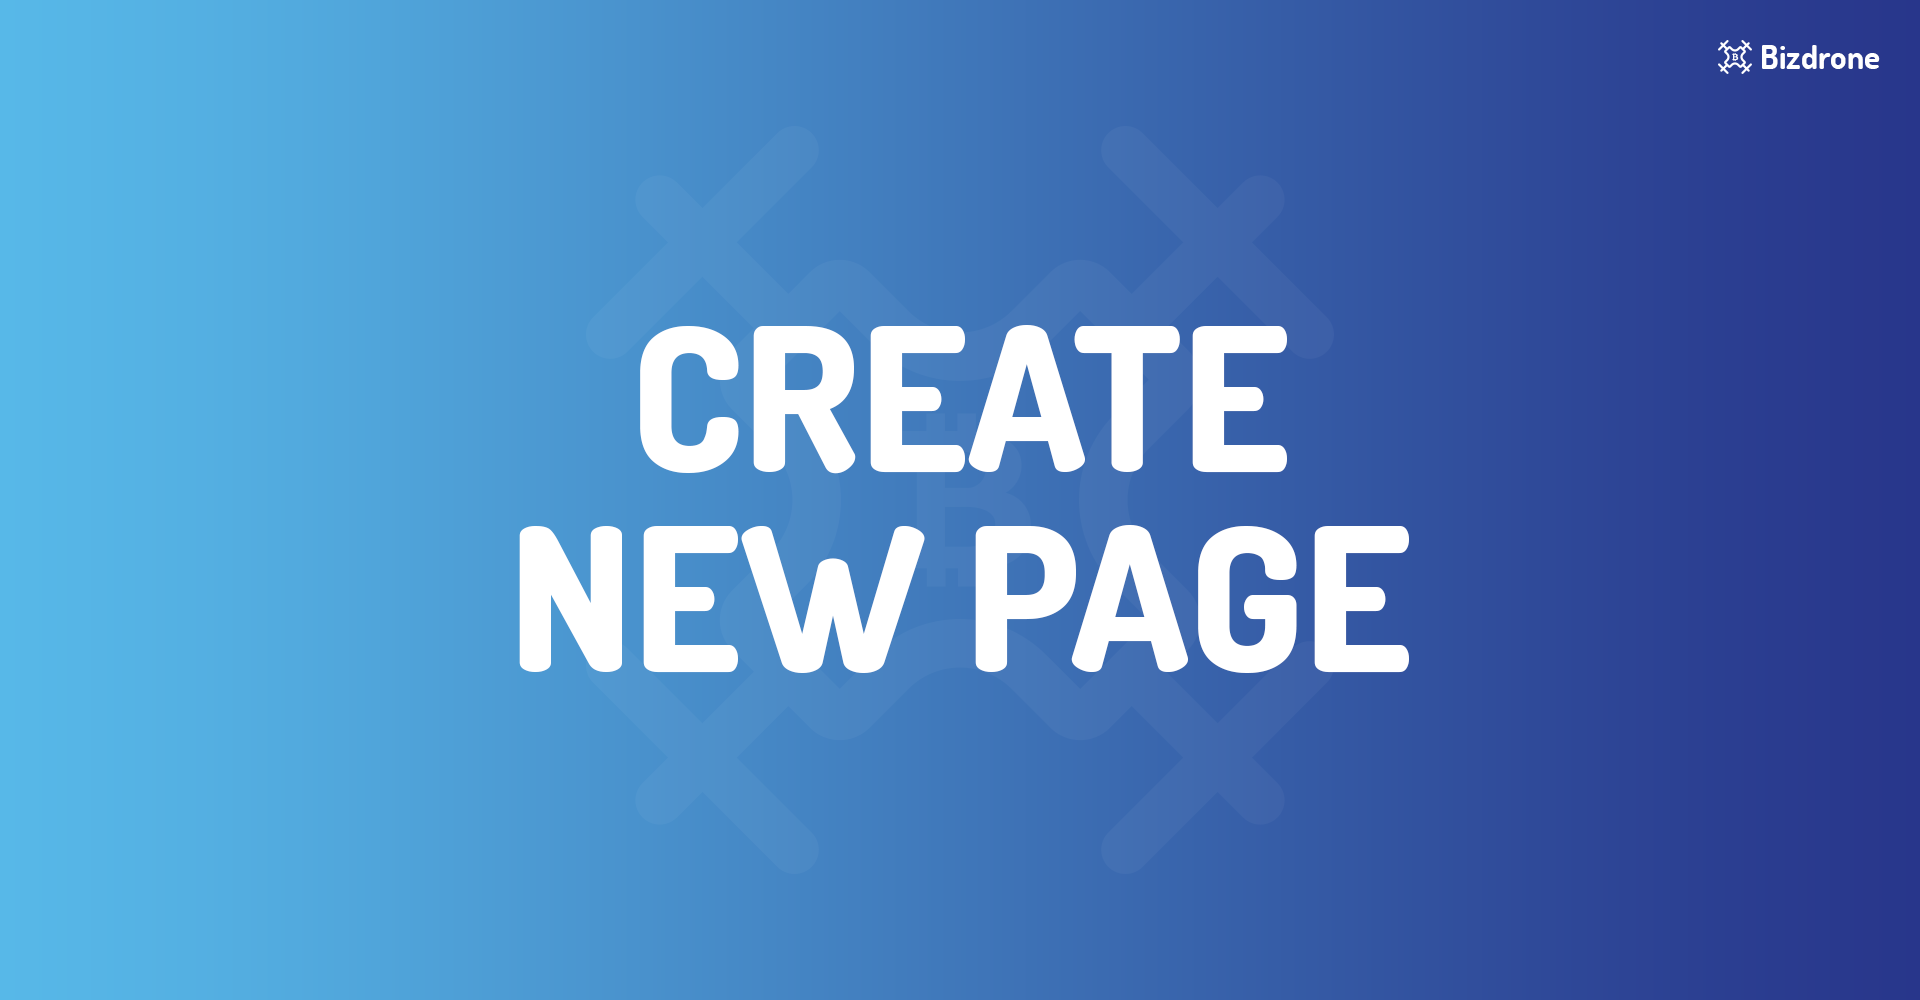 CREATE NEW PAGE